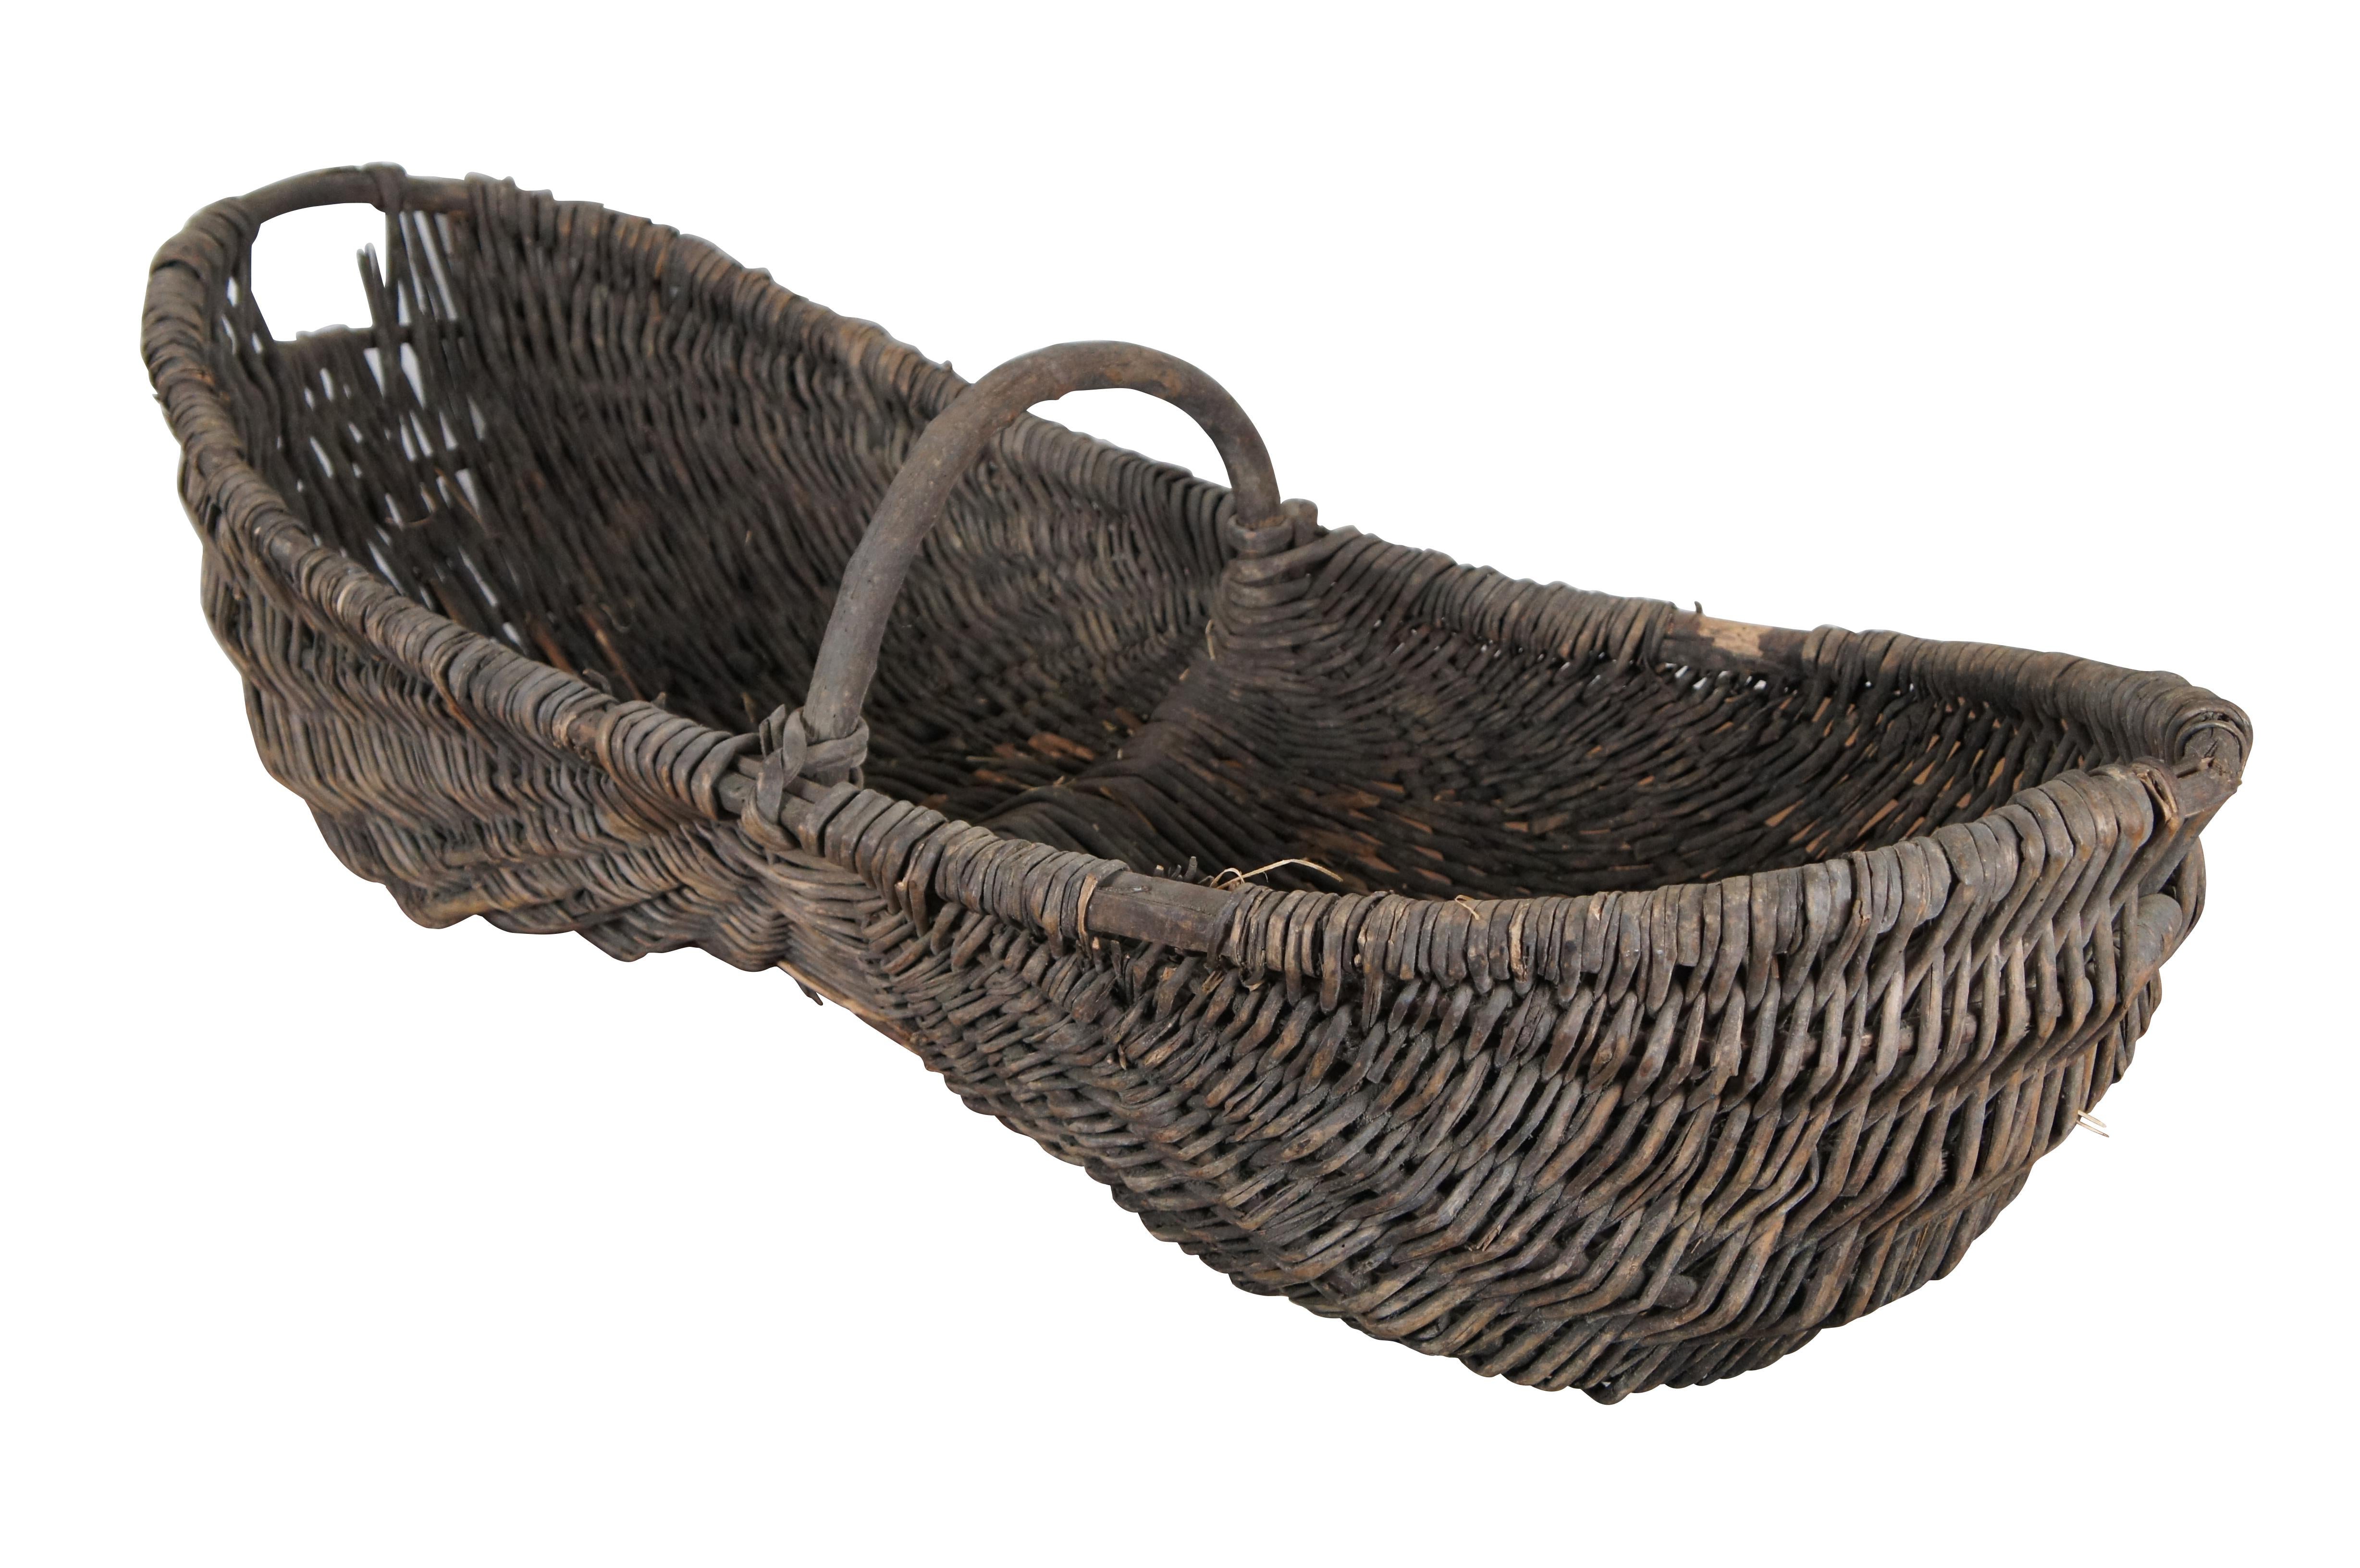 Large and impressive antique grape / wine harvest buttocks basket. Created in the Burgundy region of France circa 19th century, the unique basket made of handwoven wicker is oval in form and features a wooden frame with handle across the top.